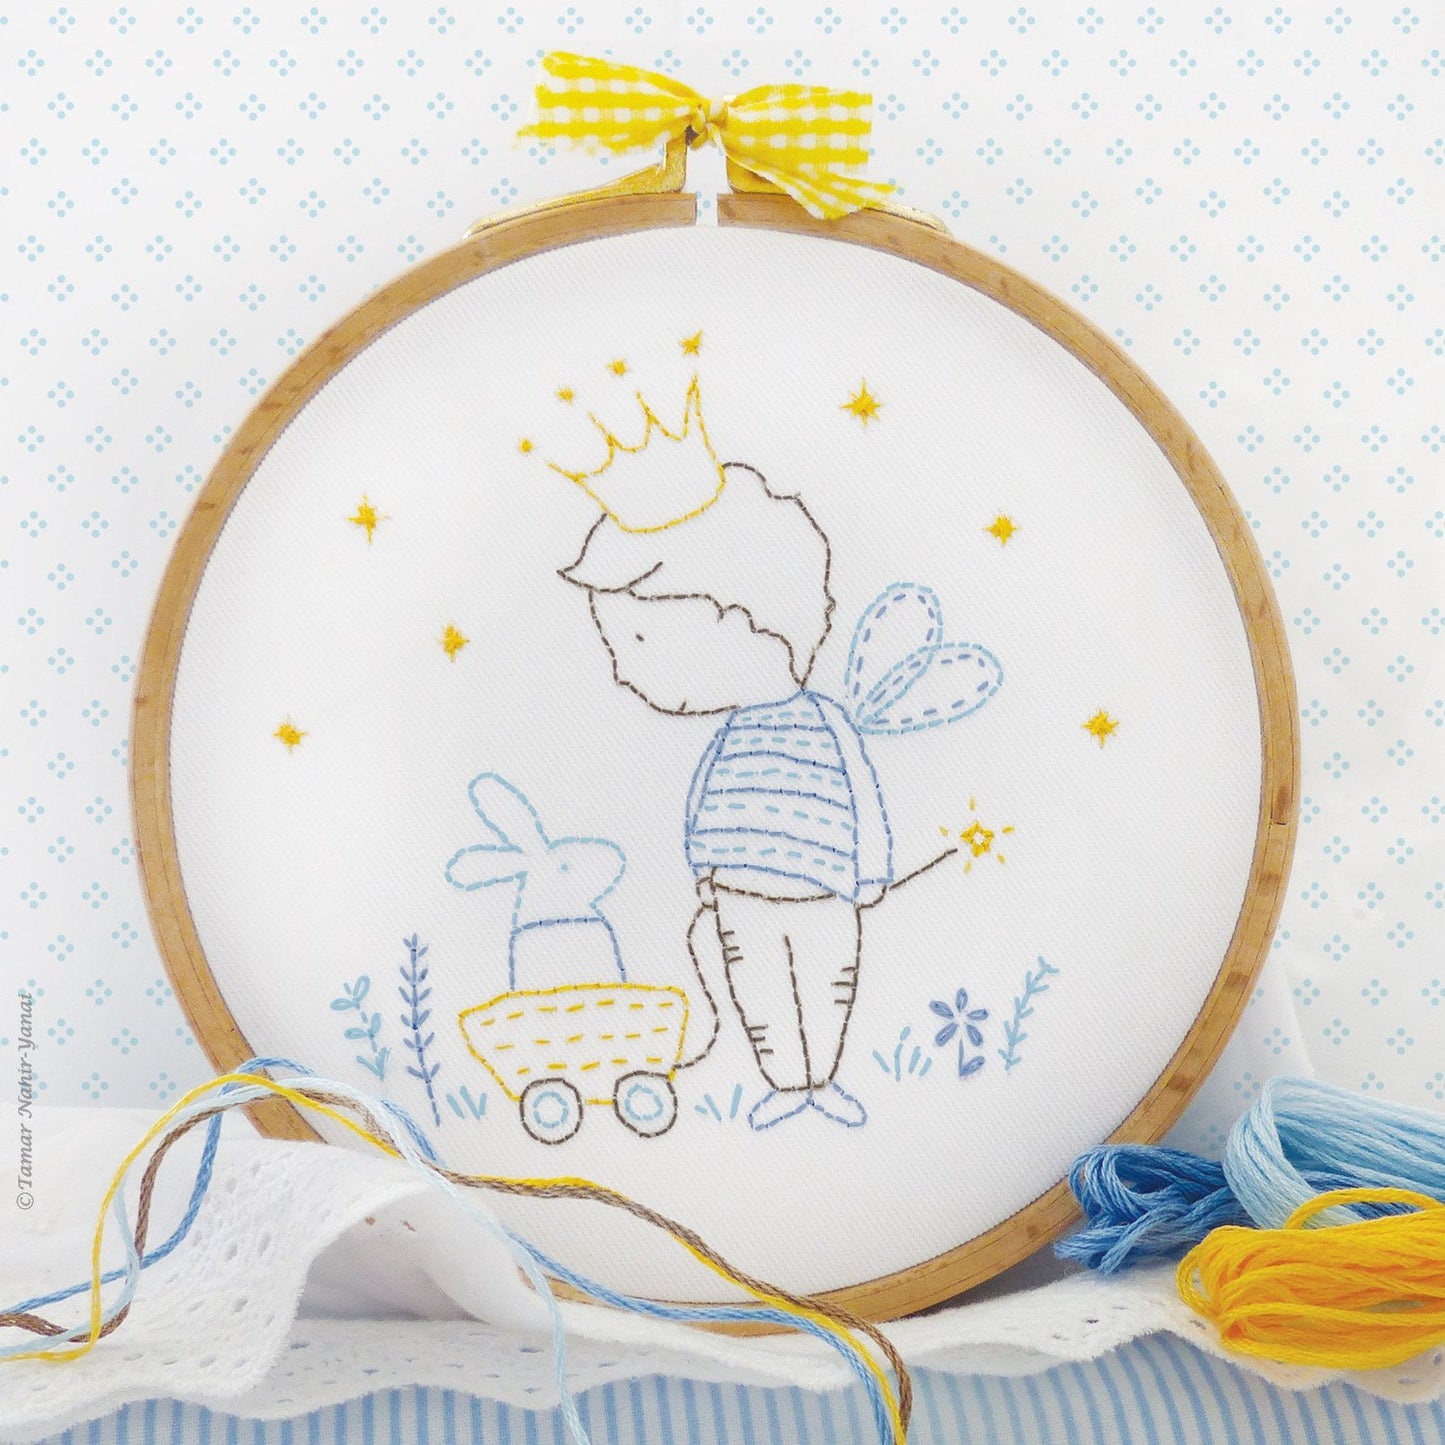 My Private Kingdom 6" Embroidery Kit